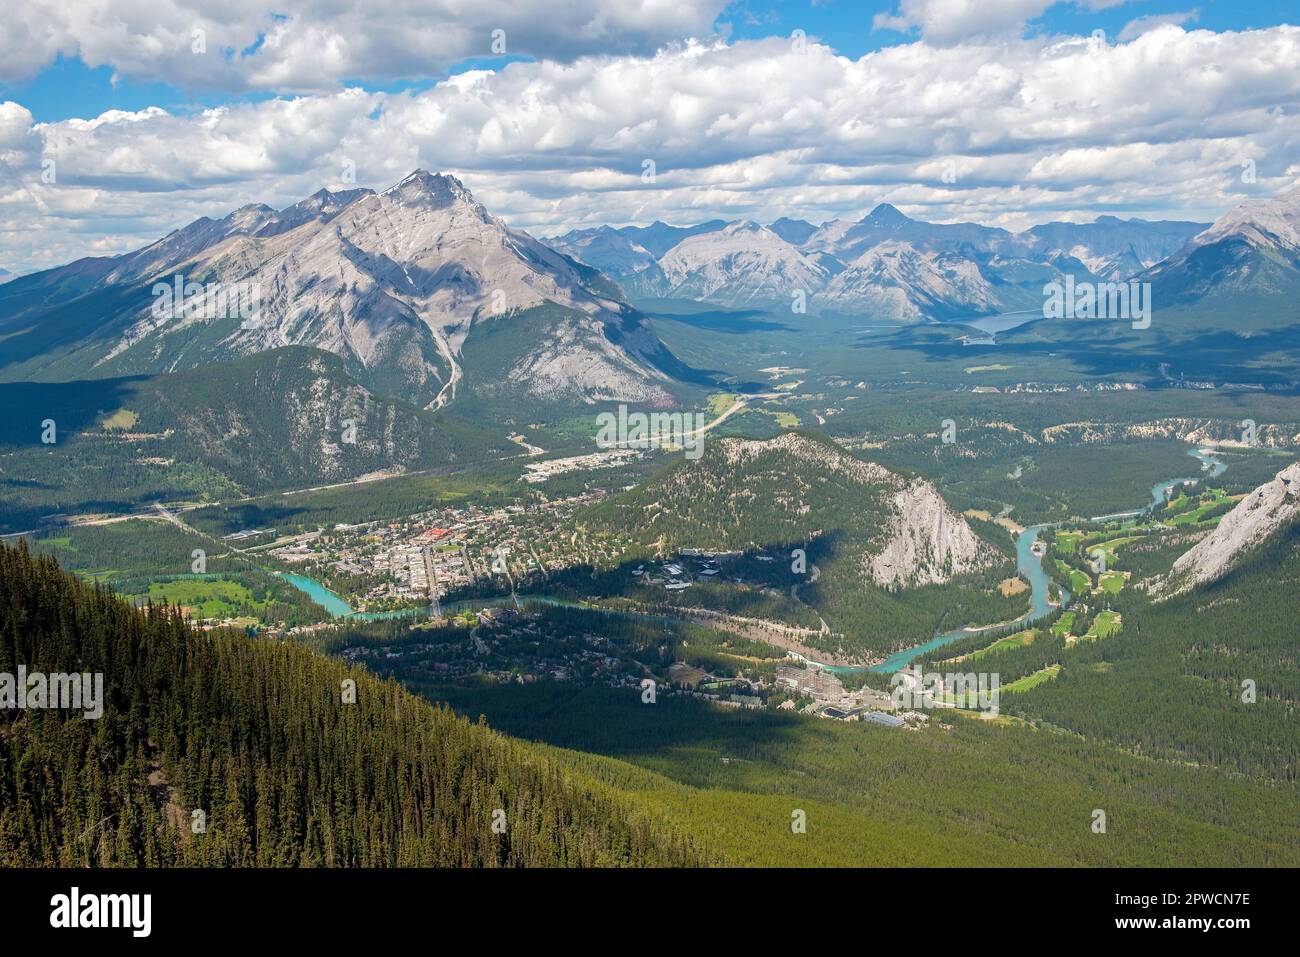 Banff city aerial landscape with Bow River and Rocky Mountains, Banff national park, Canada. Stock Photo